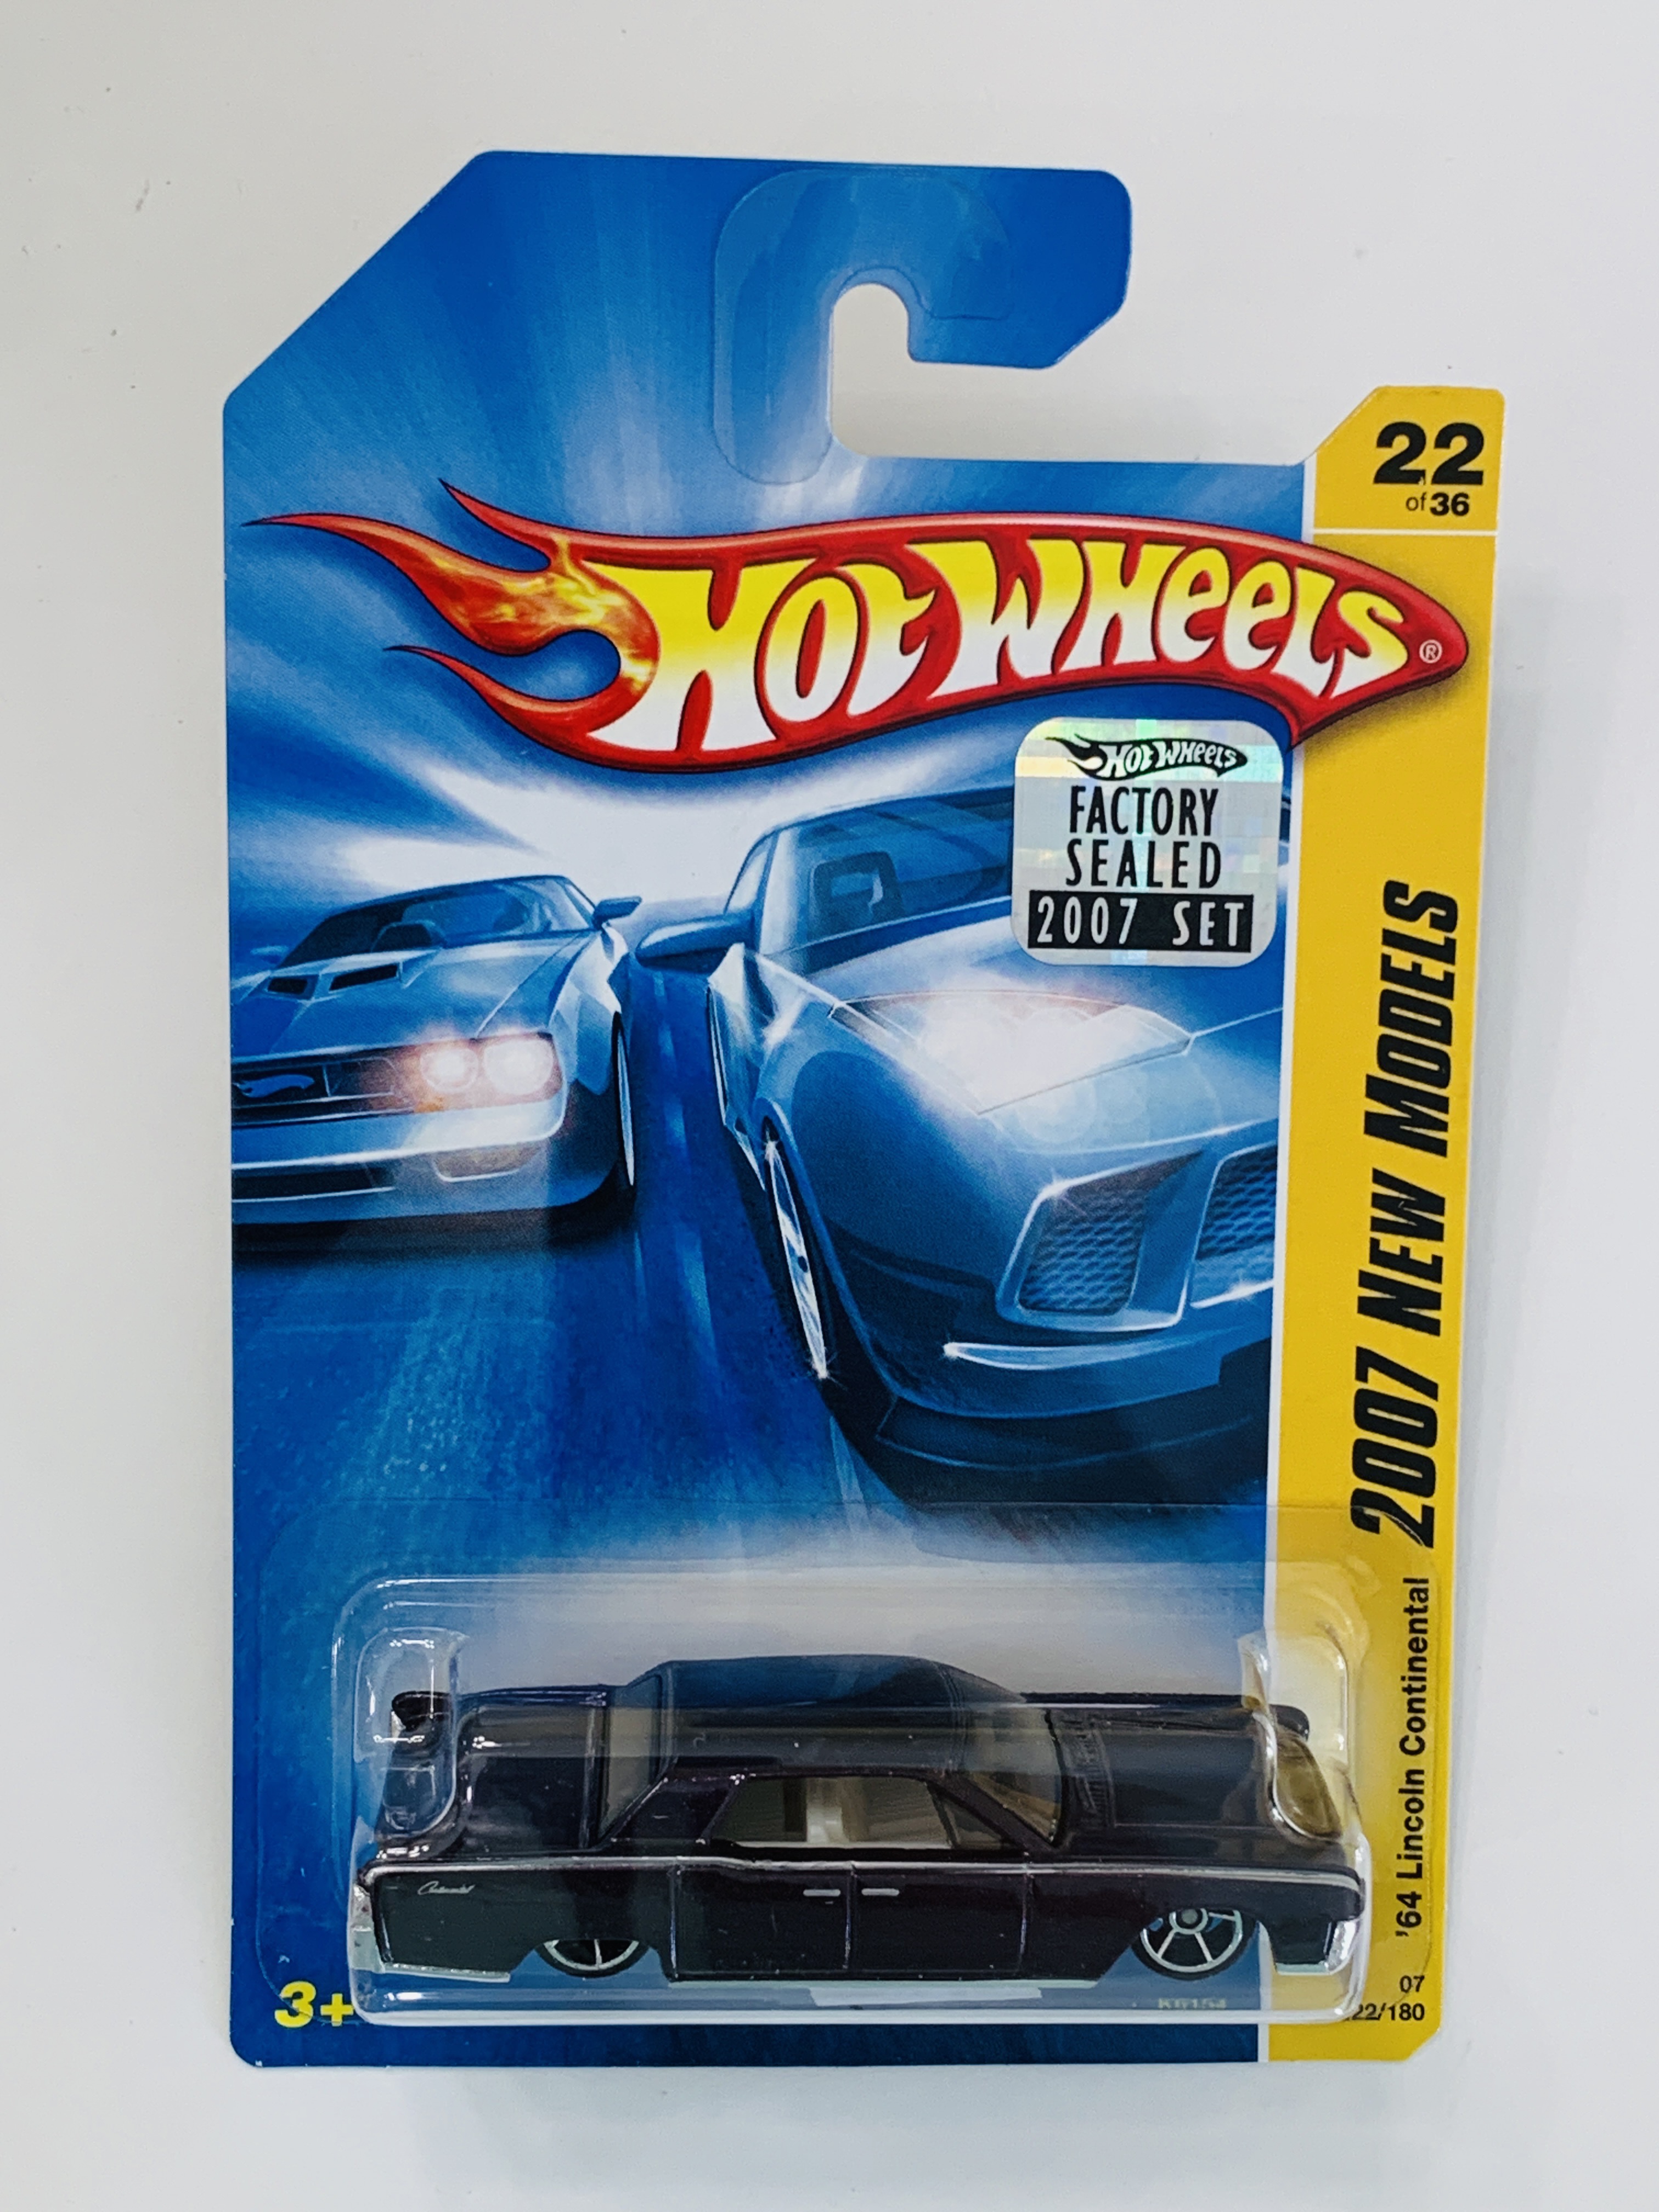 Hot Wheels 2007 Factory Set #022 '64 Lincoln Continental - White Interior